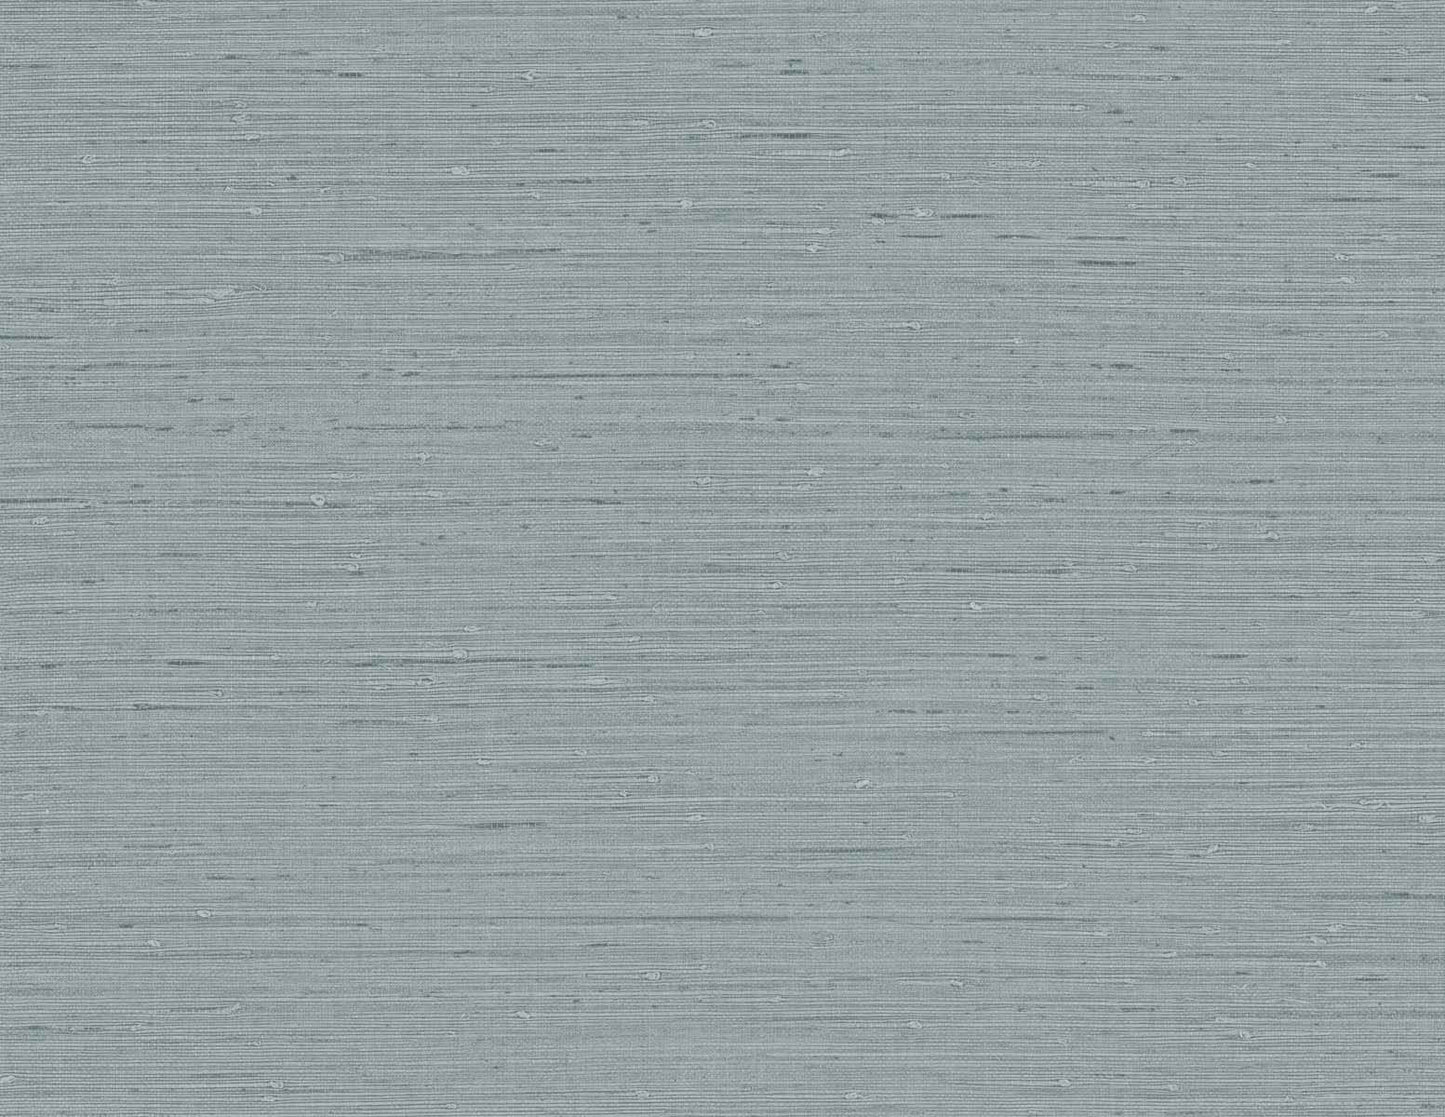 Seabrook Even More Textures Seahaven Rushcloth Wallpaper - Ethereal Blue